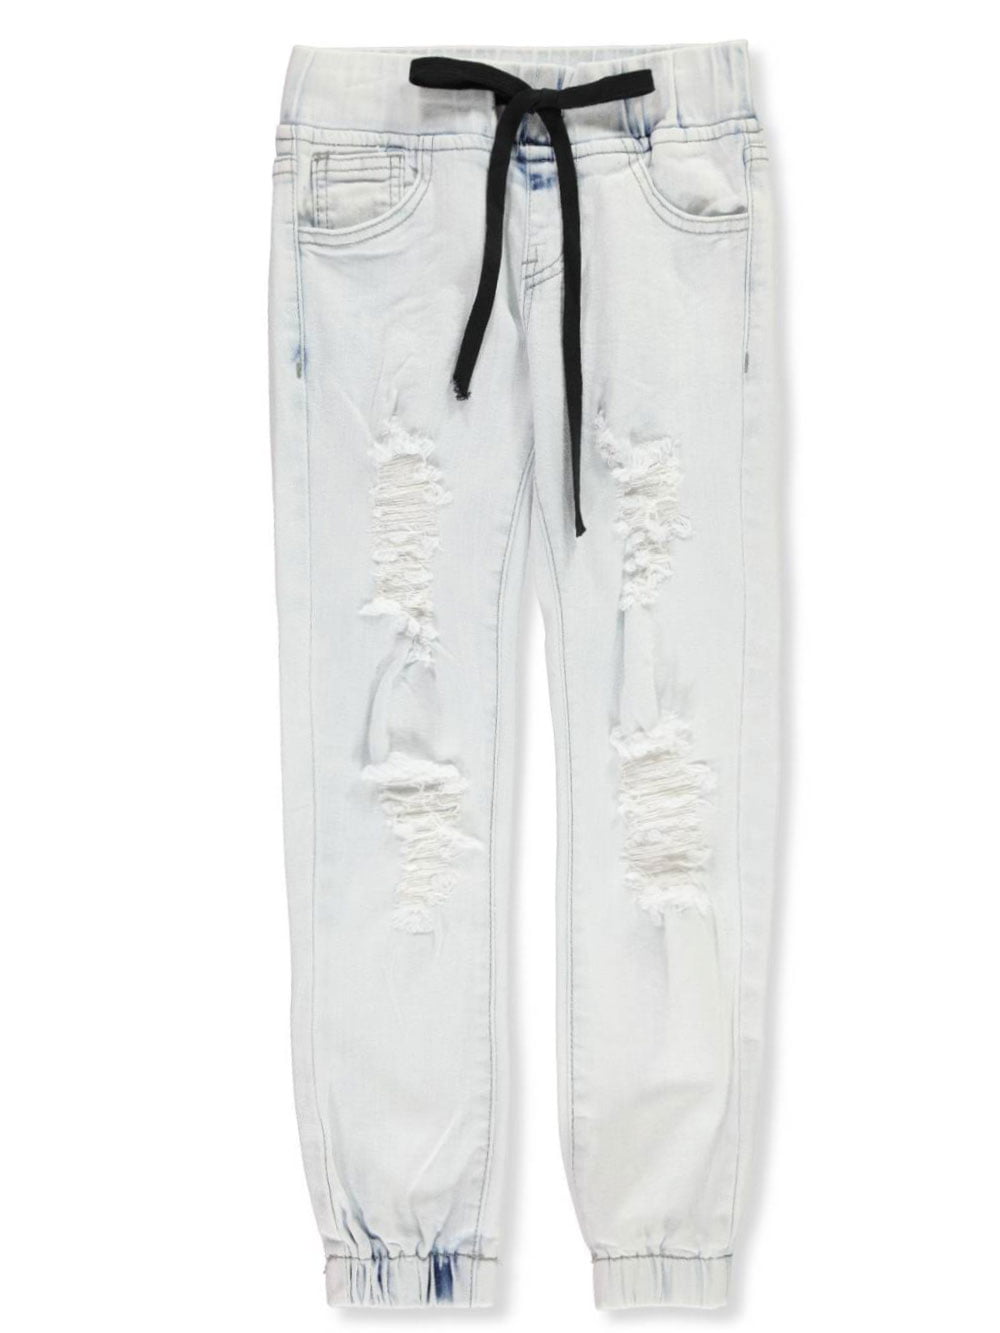 vip jeans jogger collection